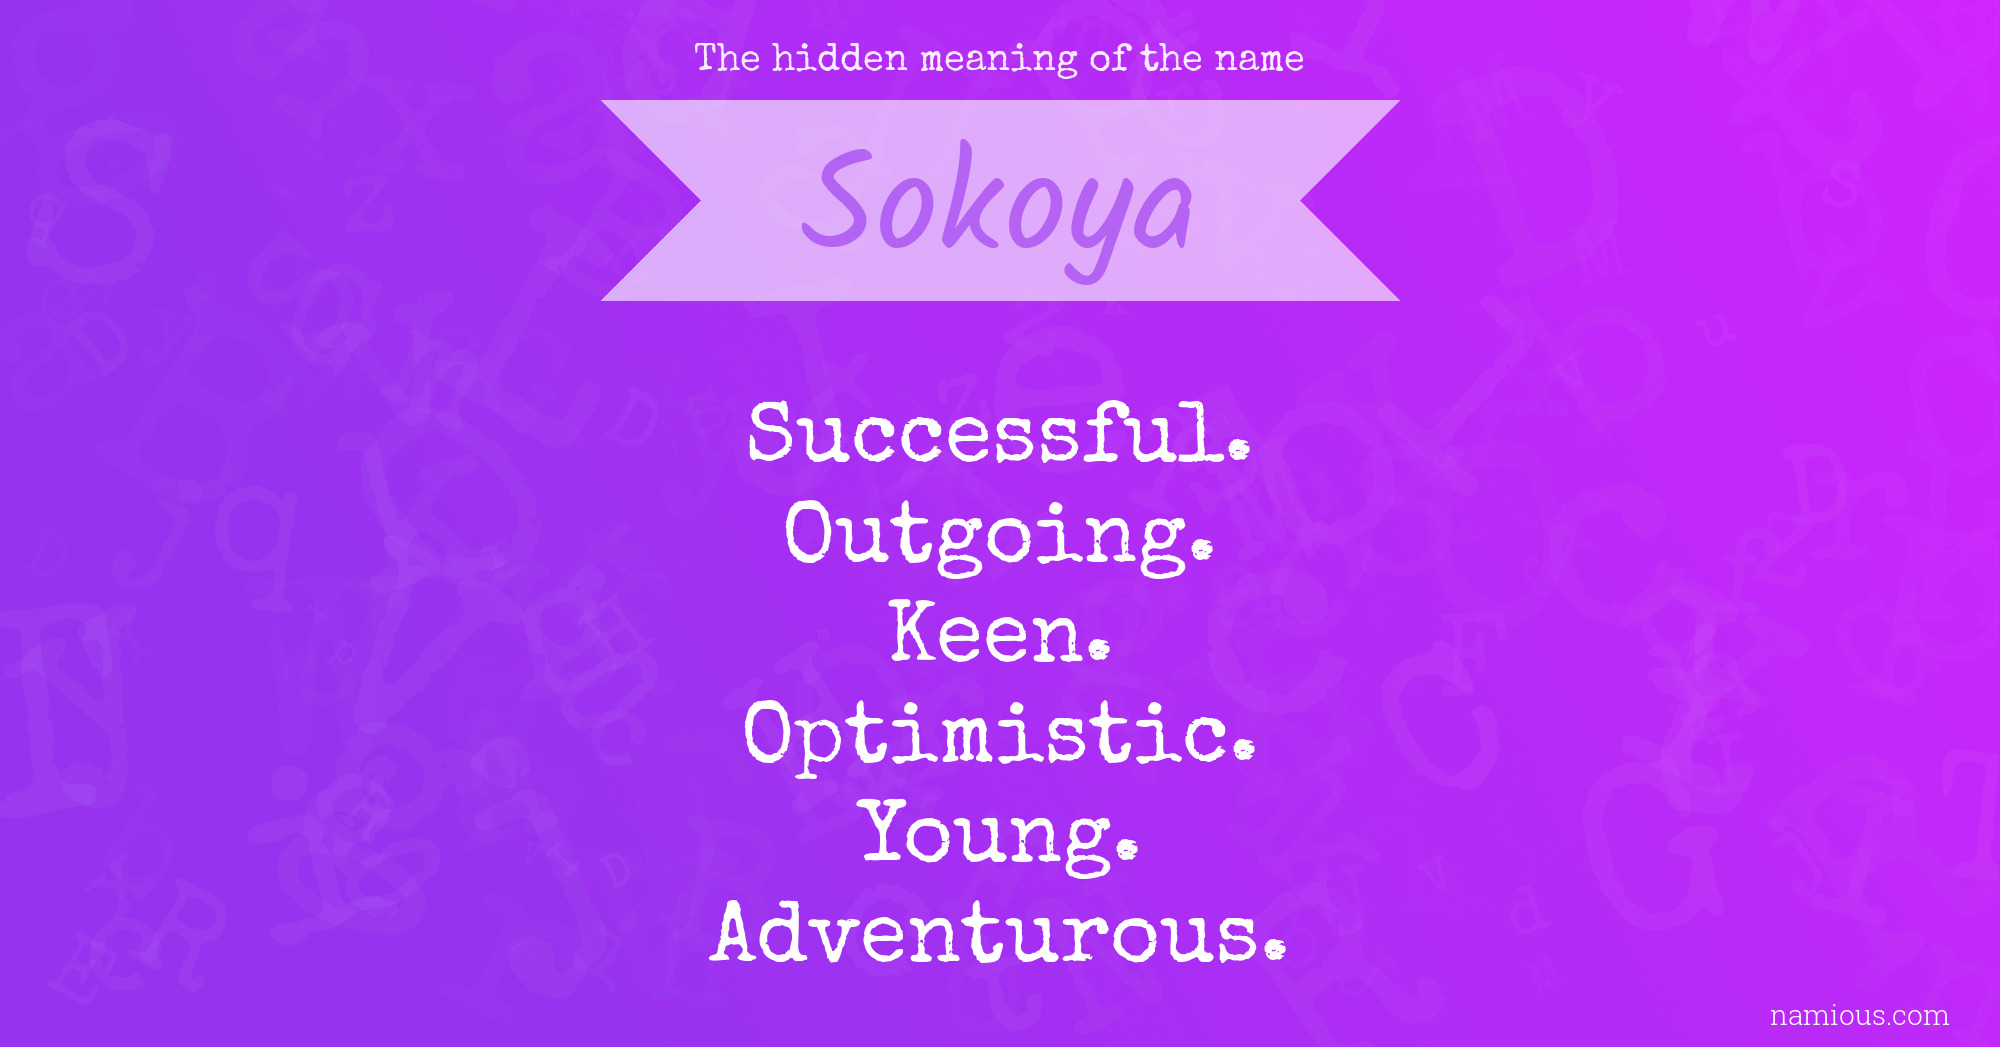 The hidden meaning of the name Sokoya